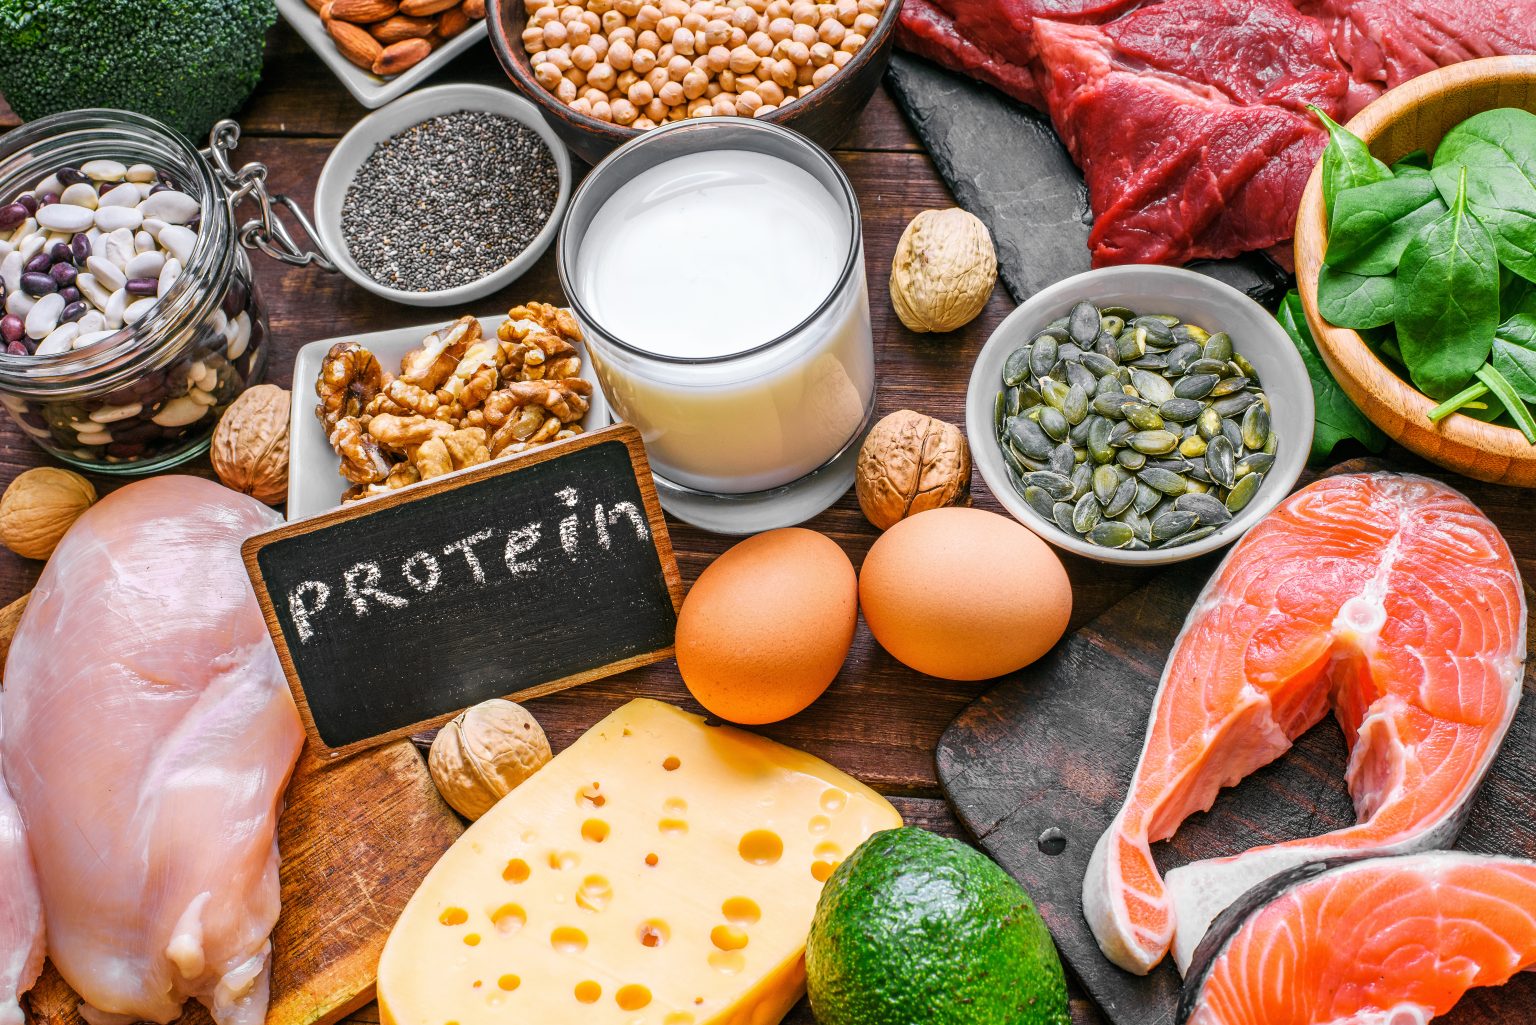 What meals have the highest rate of protein synthesis?